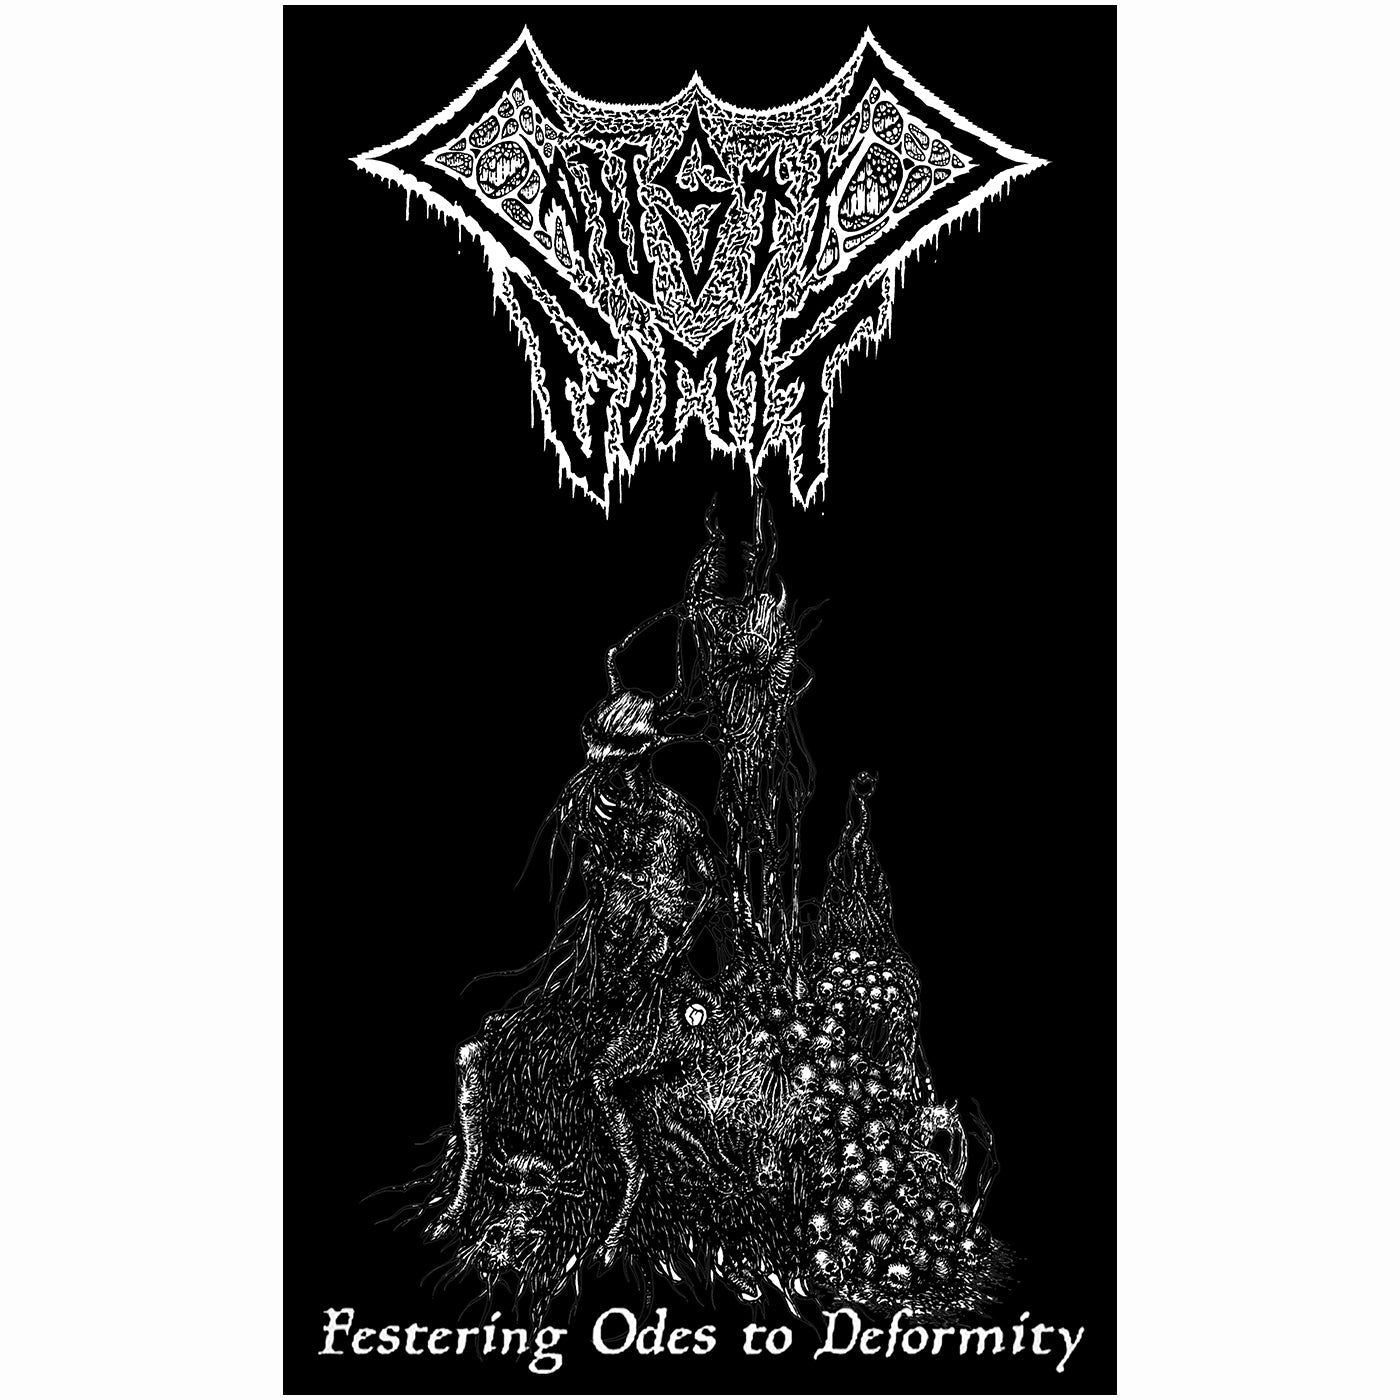 Caustic Vomit " Festering Odes To Deformity " Flag / Banner / Tapestry